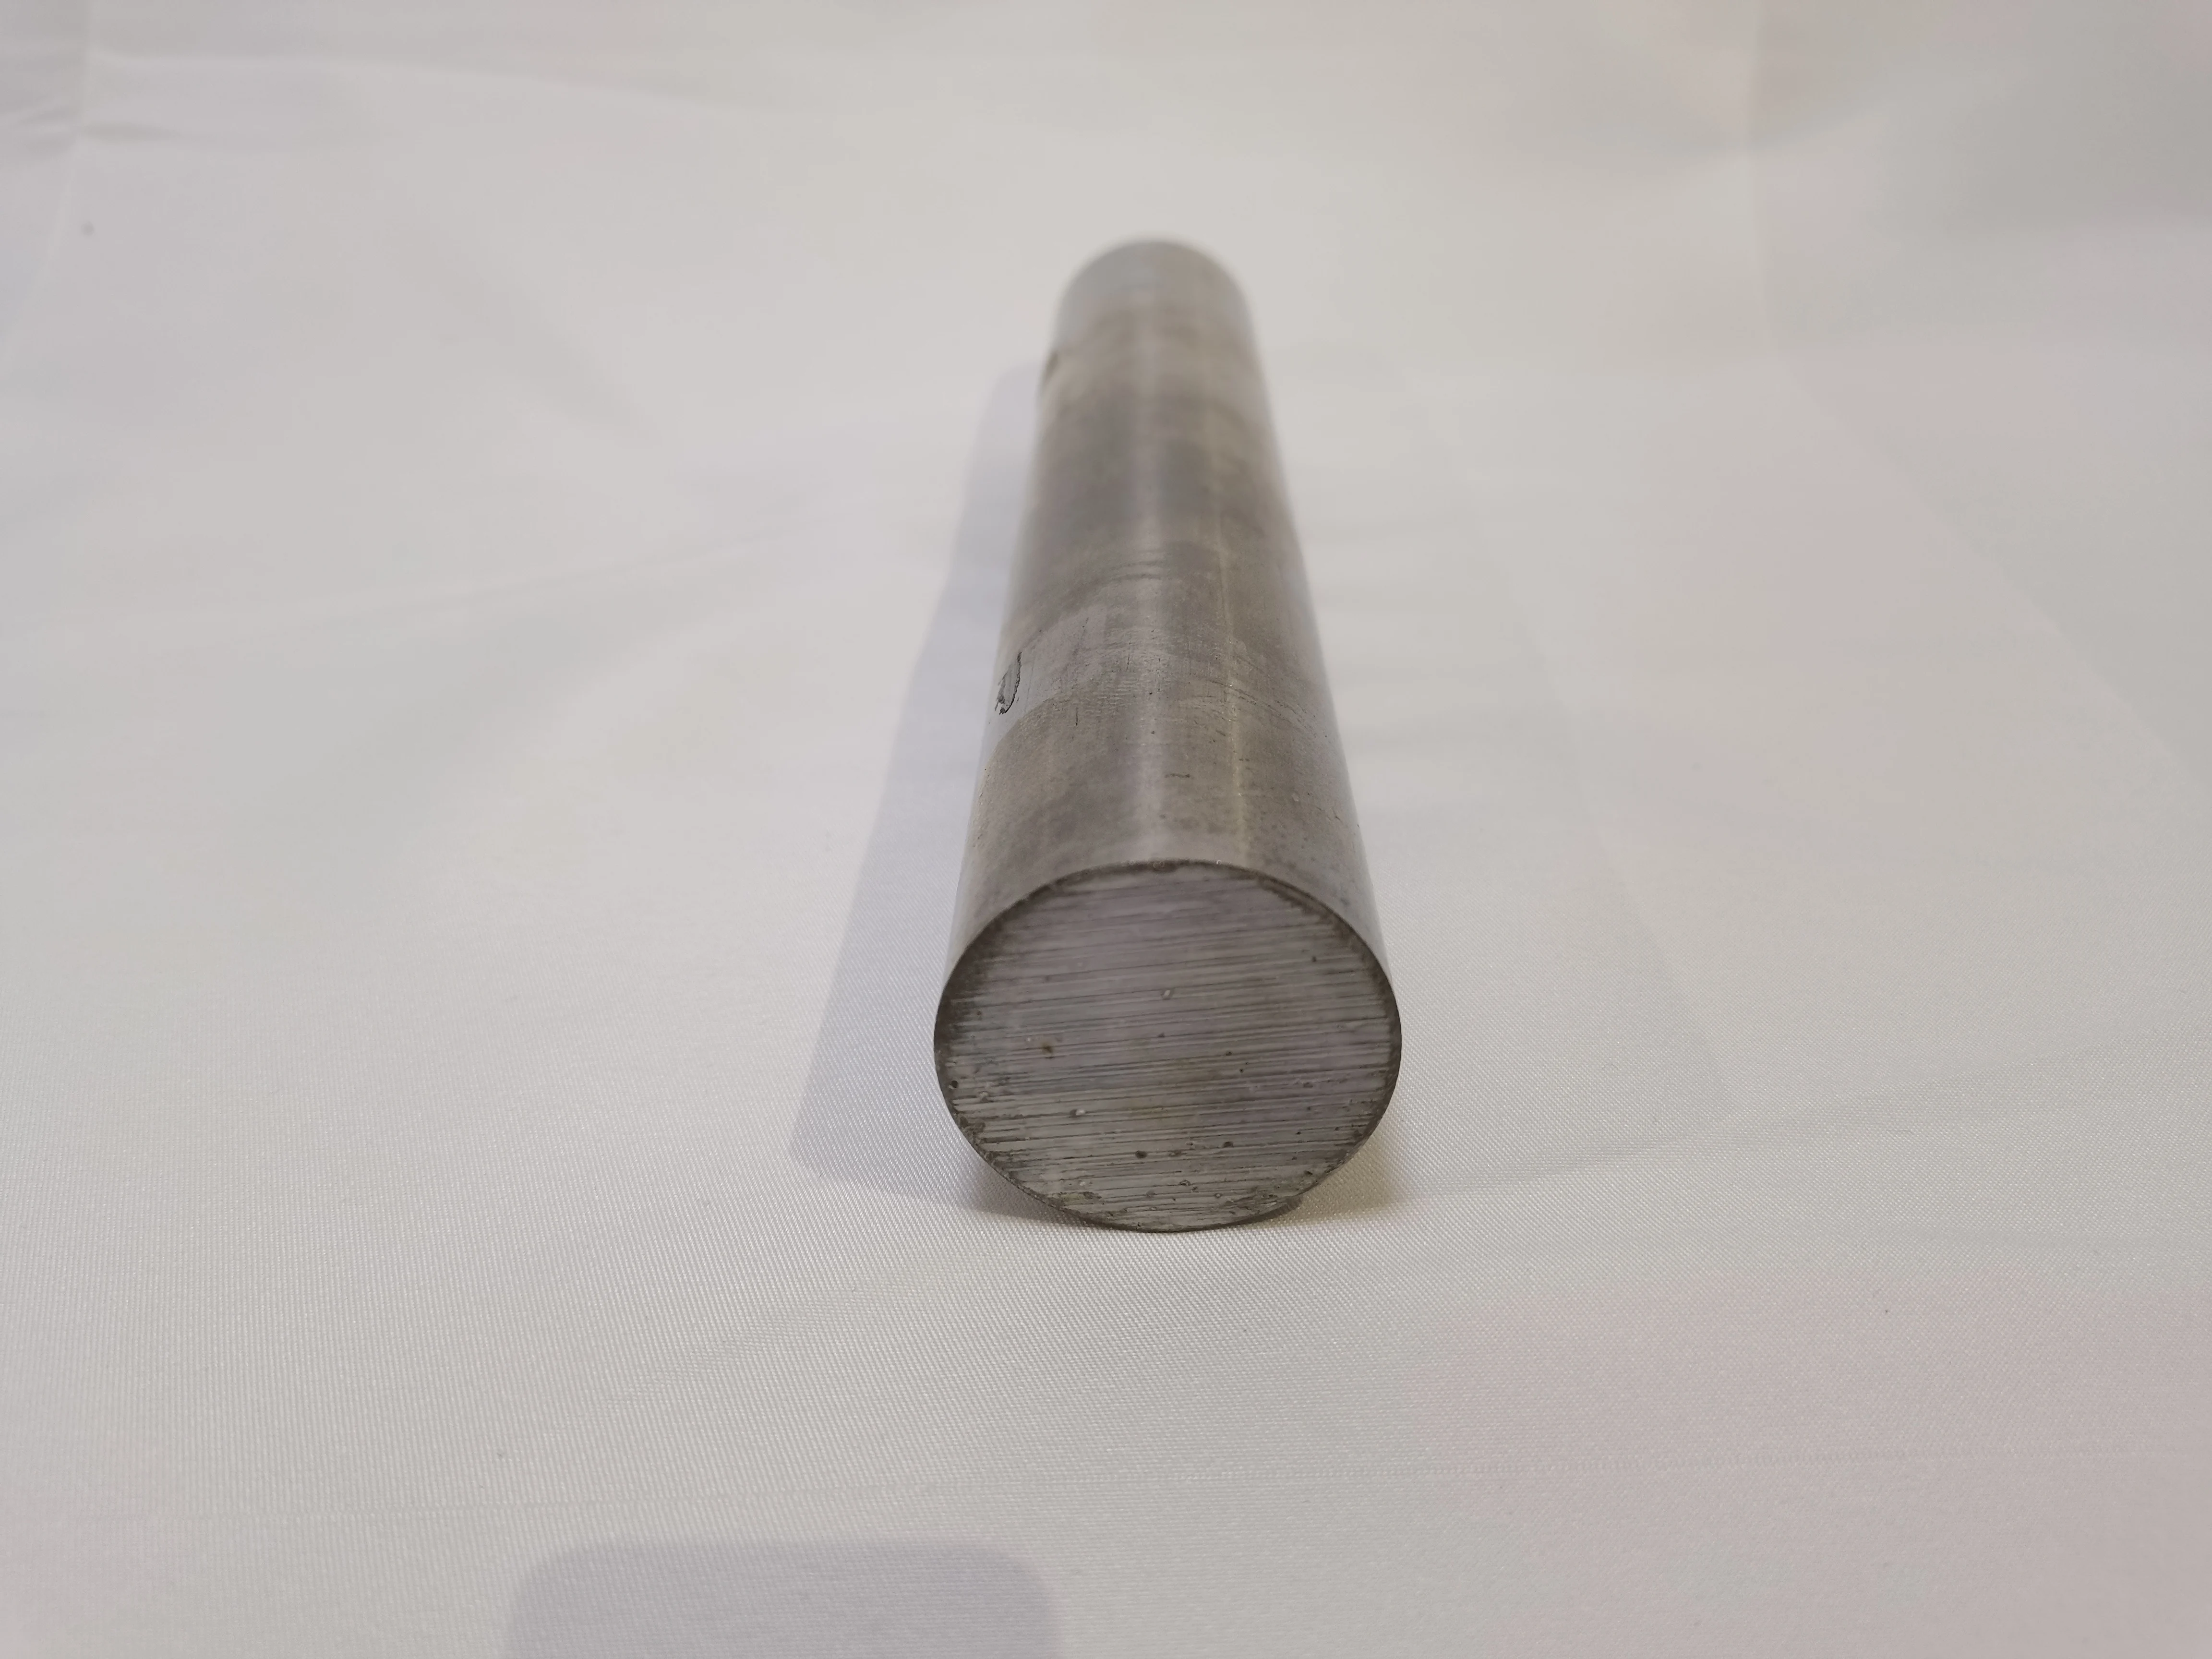 
SUS304L Finished Machining Price Per Kg Stainless Steel Round Bar 